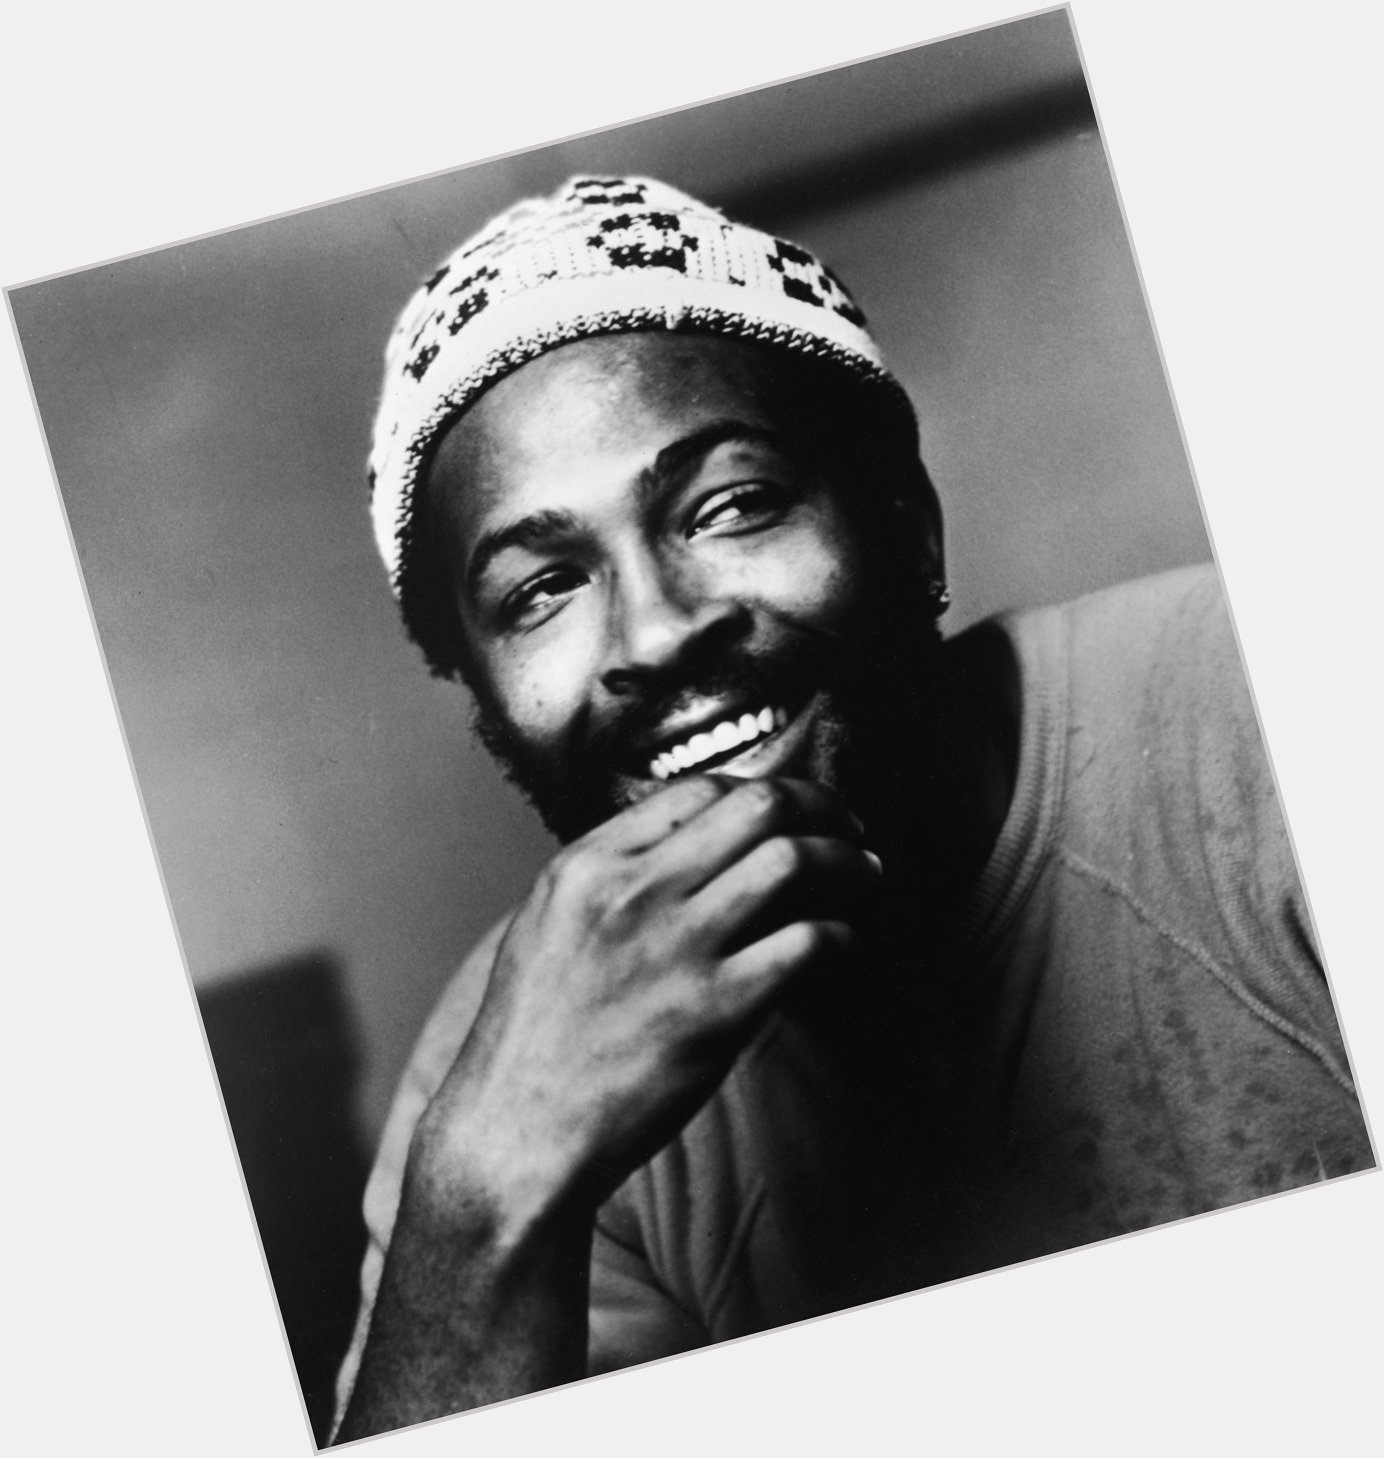 Happy birthday Marvin Gaye! Tune into to celebrate with music video blocks at 3pm and 11pm EST! 